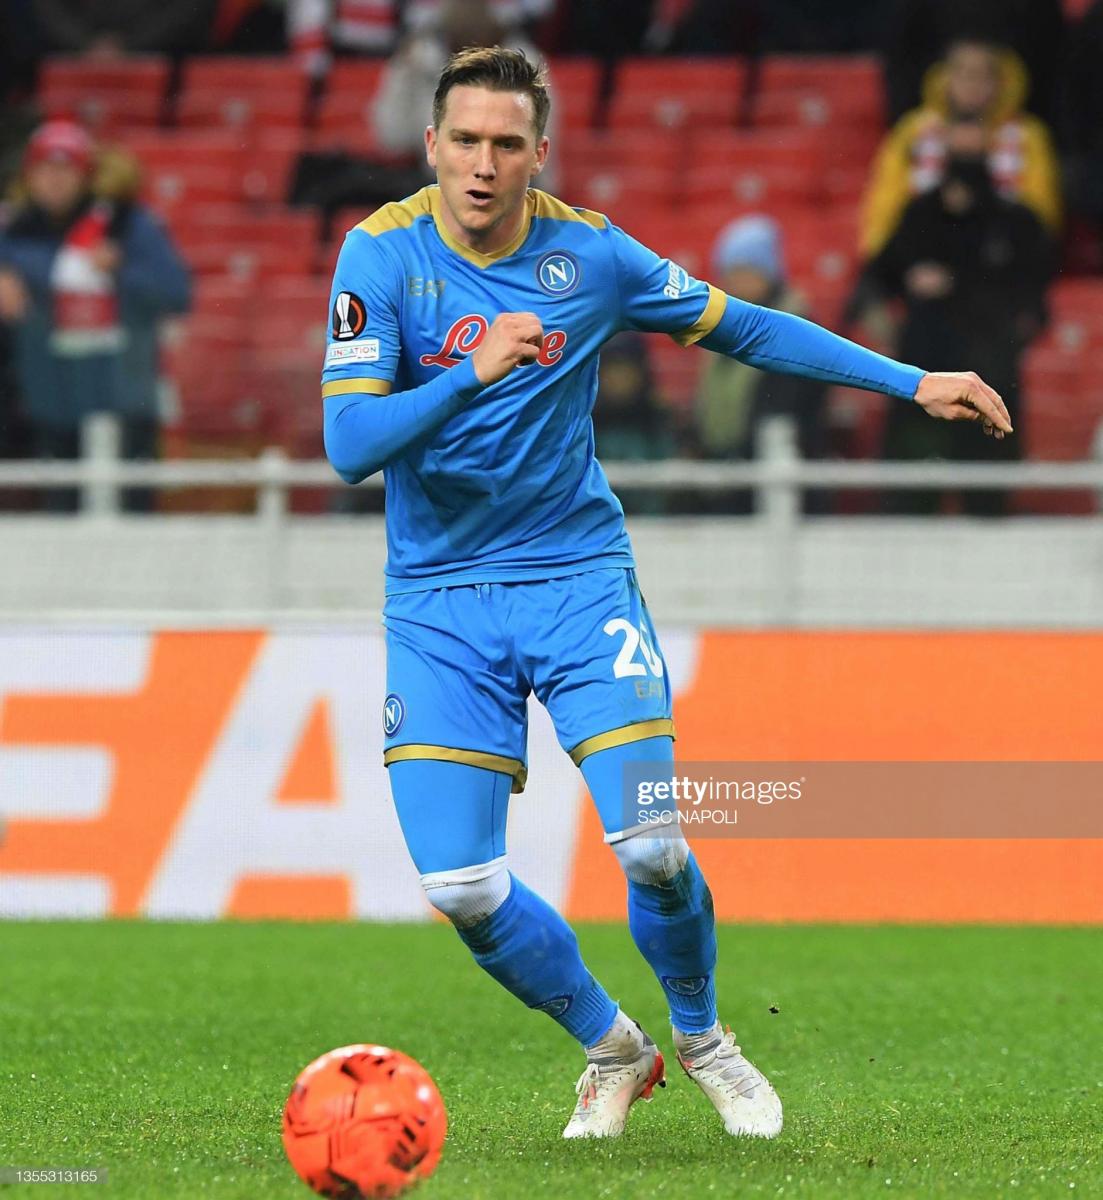 Foto: Getty images// SSC NAPOLI